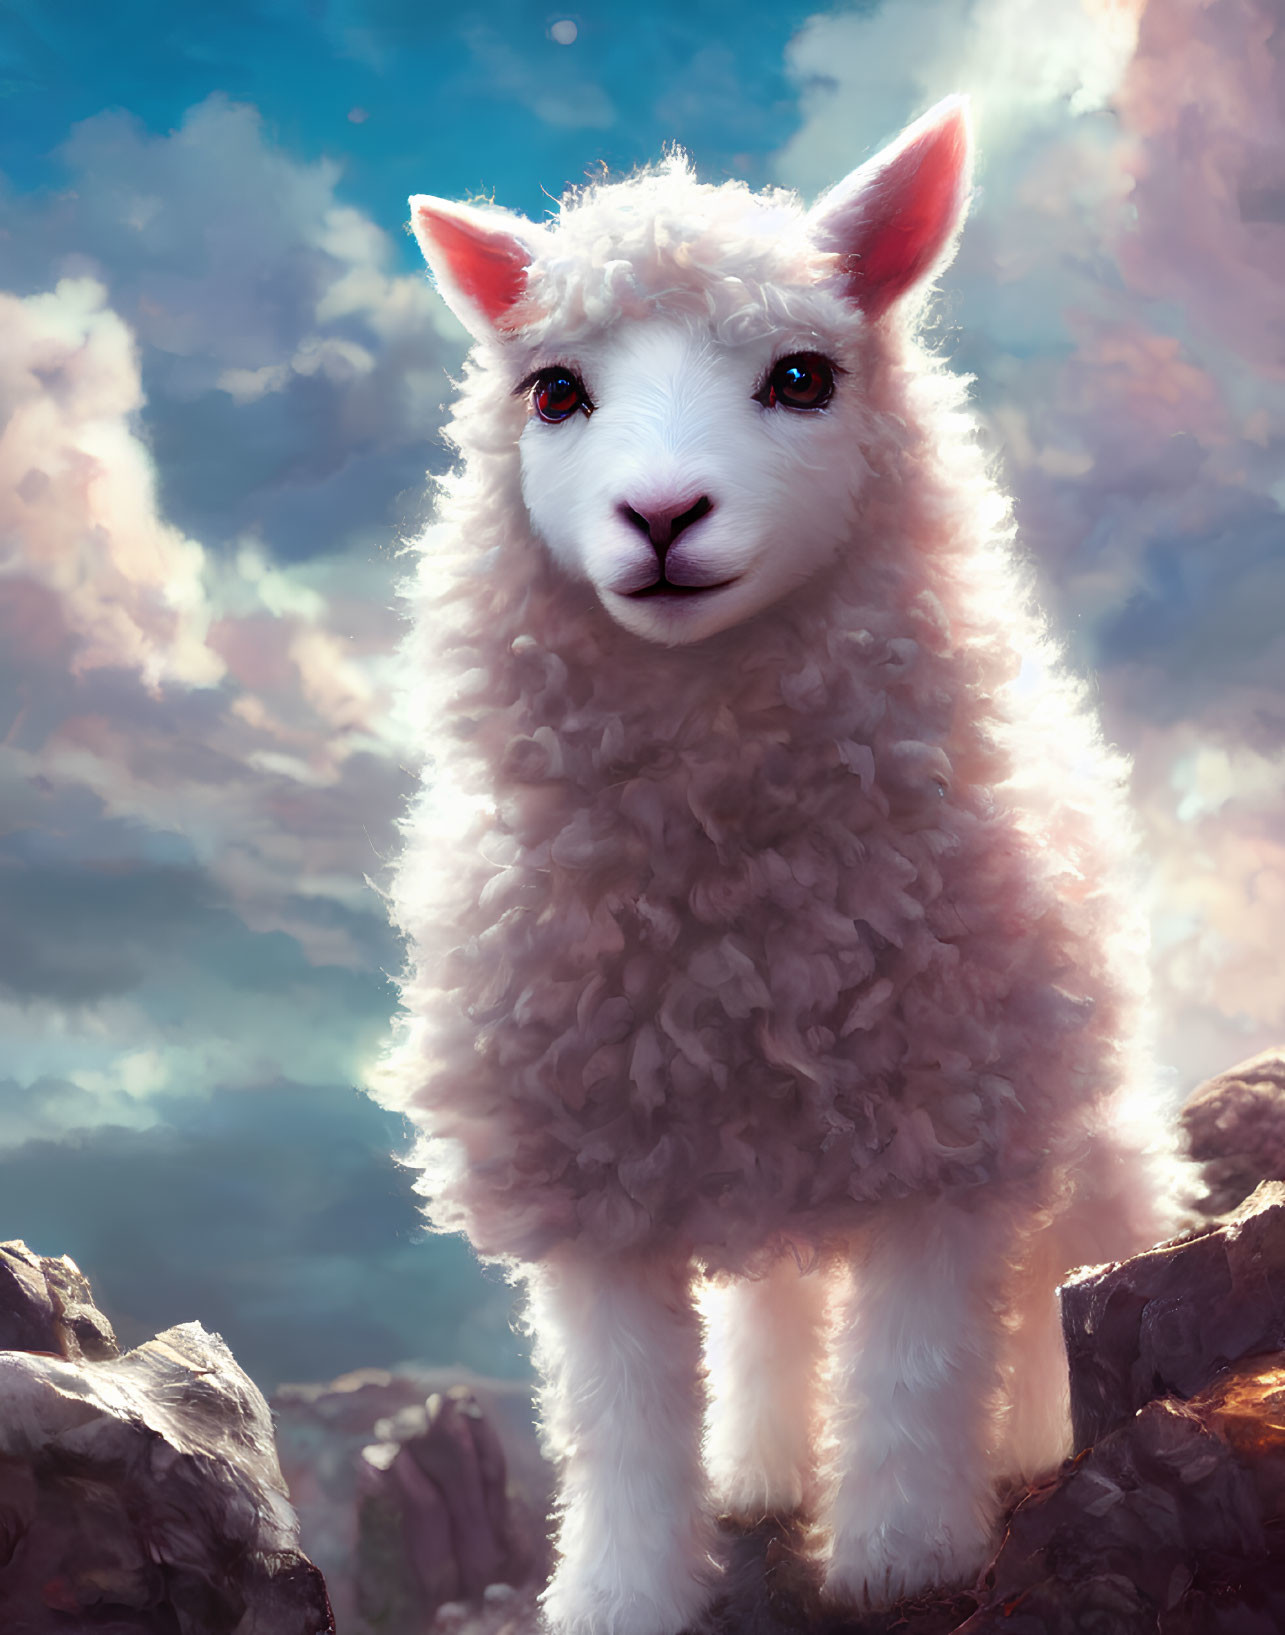 White llama with woolly coat on rocky terrain under dramatic sky